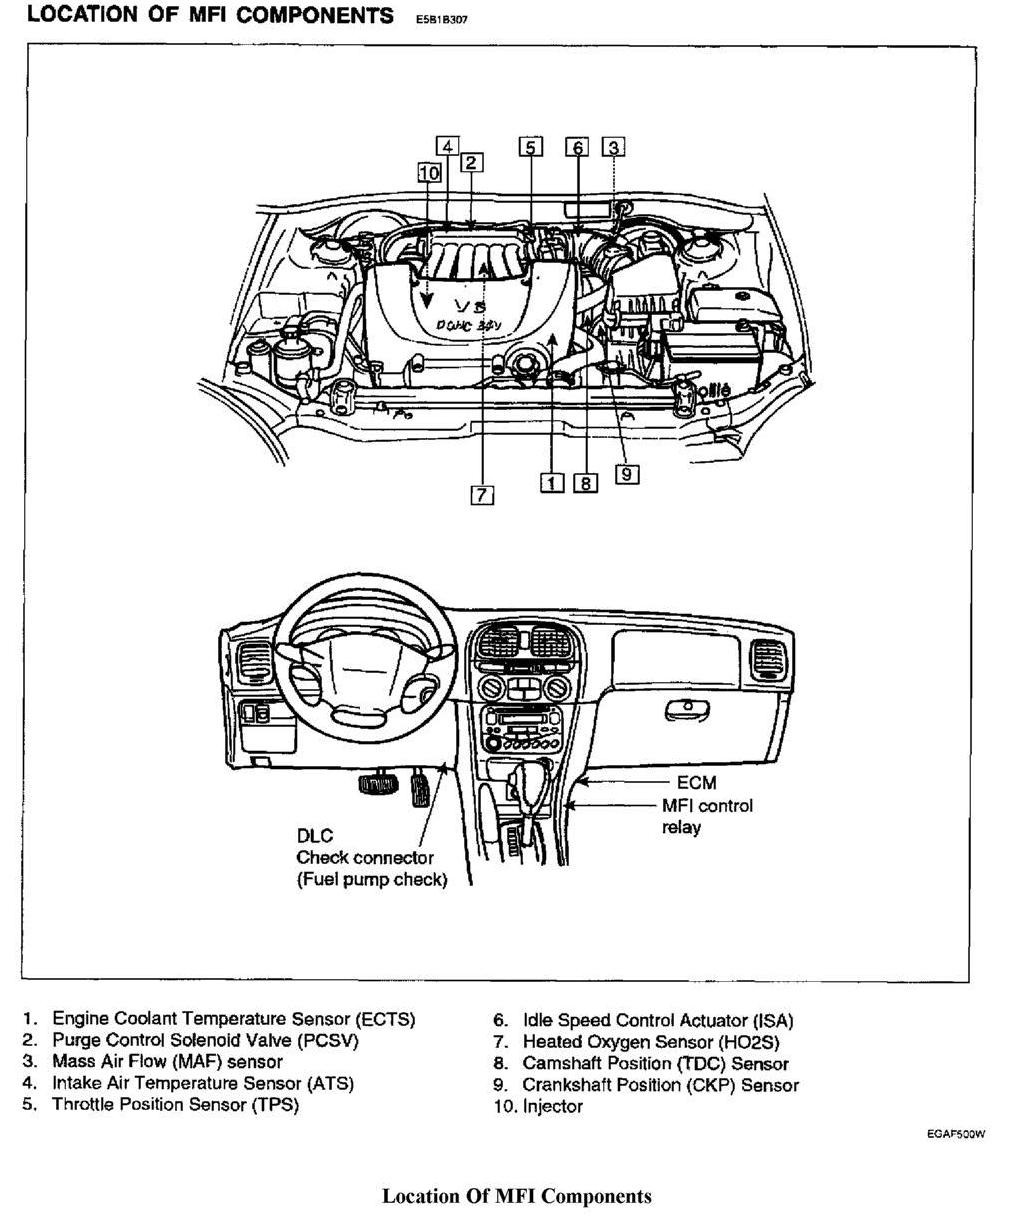 Diagram Circuit Air Accent 2005 I Have A 2005 sonata Gls V6 that Starts Well, Runs Well but Shuts … Of Diagram Circuit Air Accent 2005